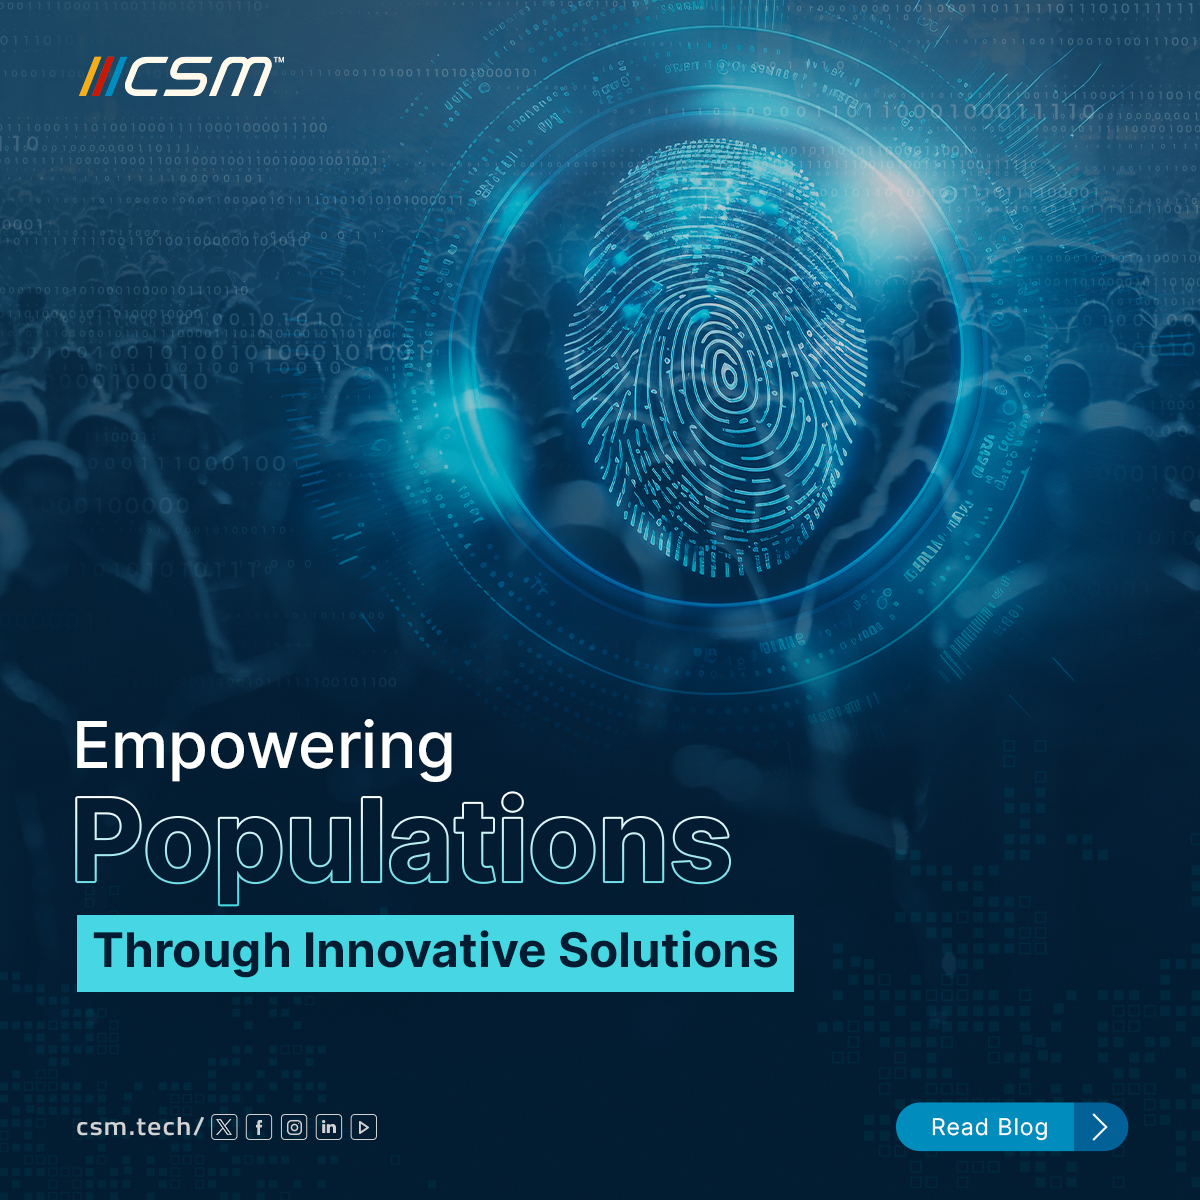 Transforming lives with dynamic social registries and cutting-edge technology. 👉Read our latest blog: bit.ly/3xEPxDQ #CSMTech #SocialRegistry #DynamicRegistries #InclusiveSociety #Empowerment #DigitalTransformation